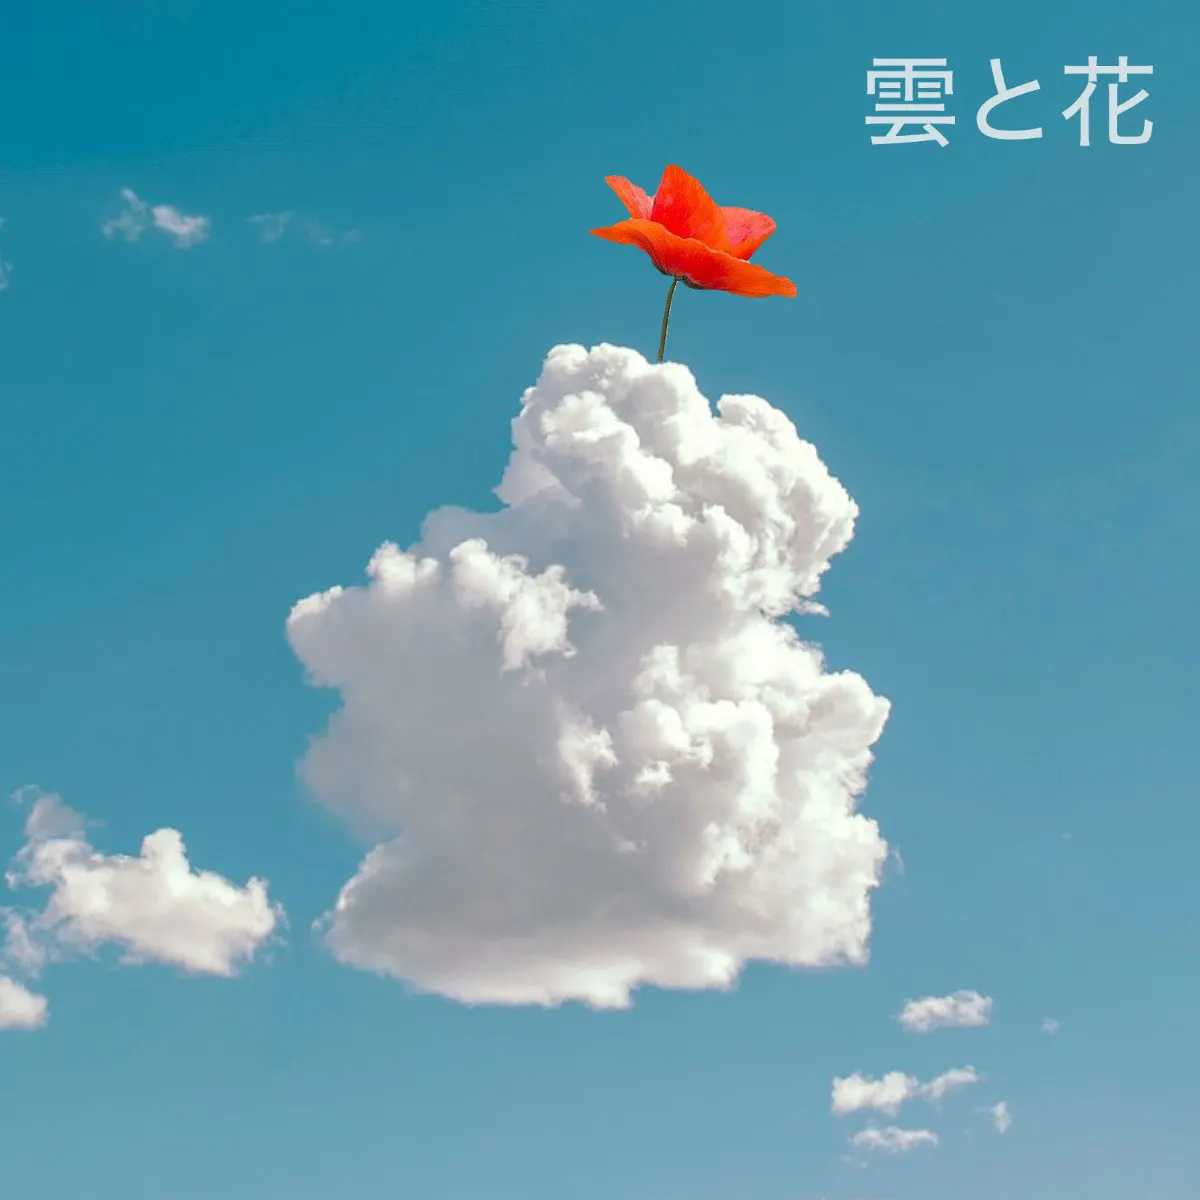 Cloud and flower instagram